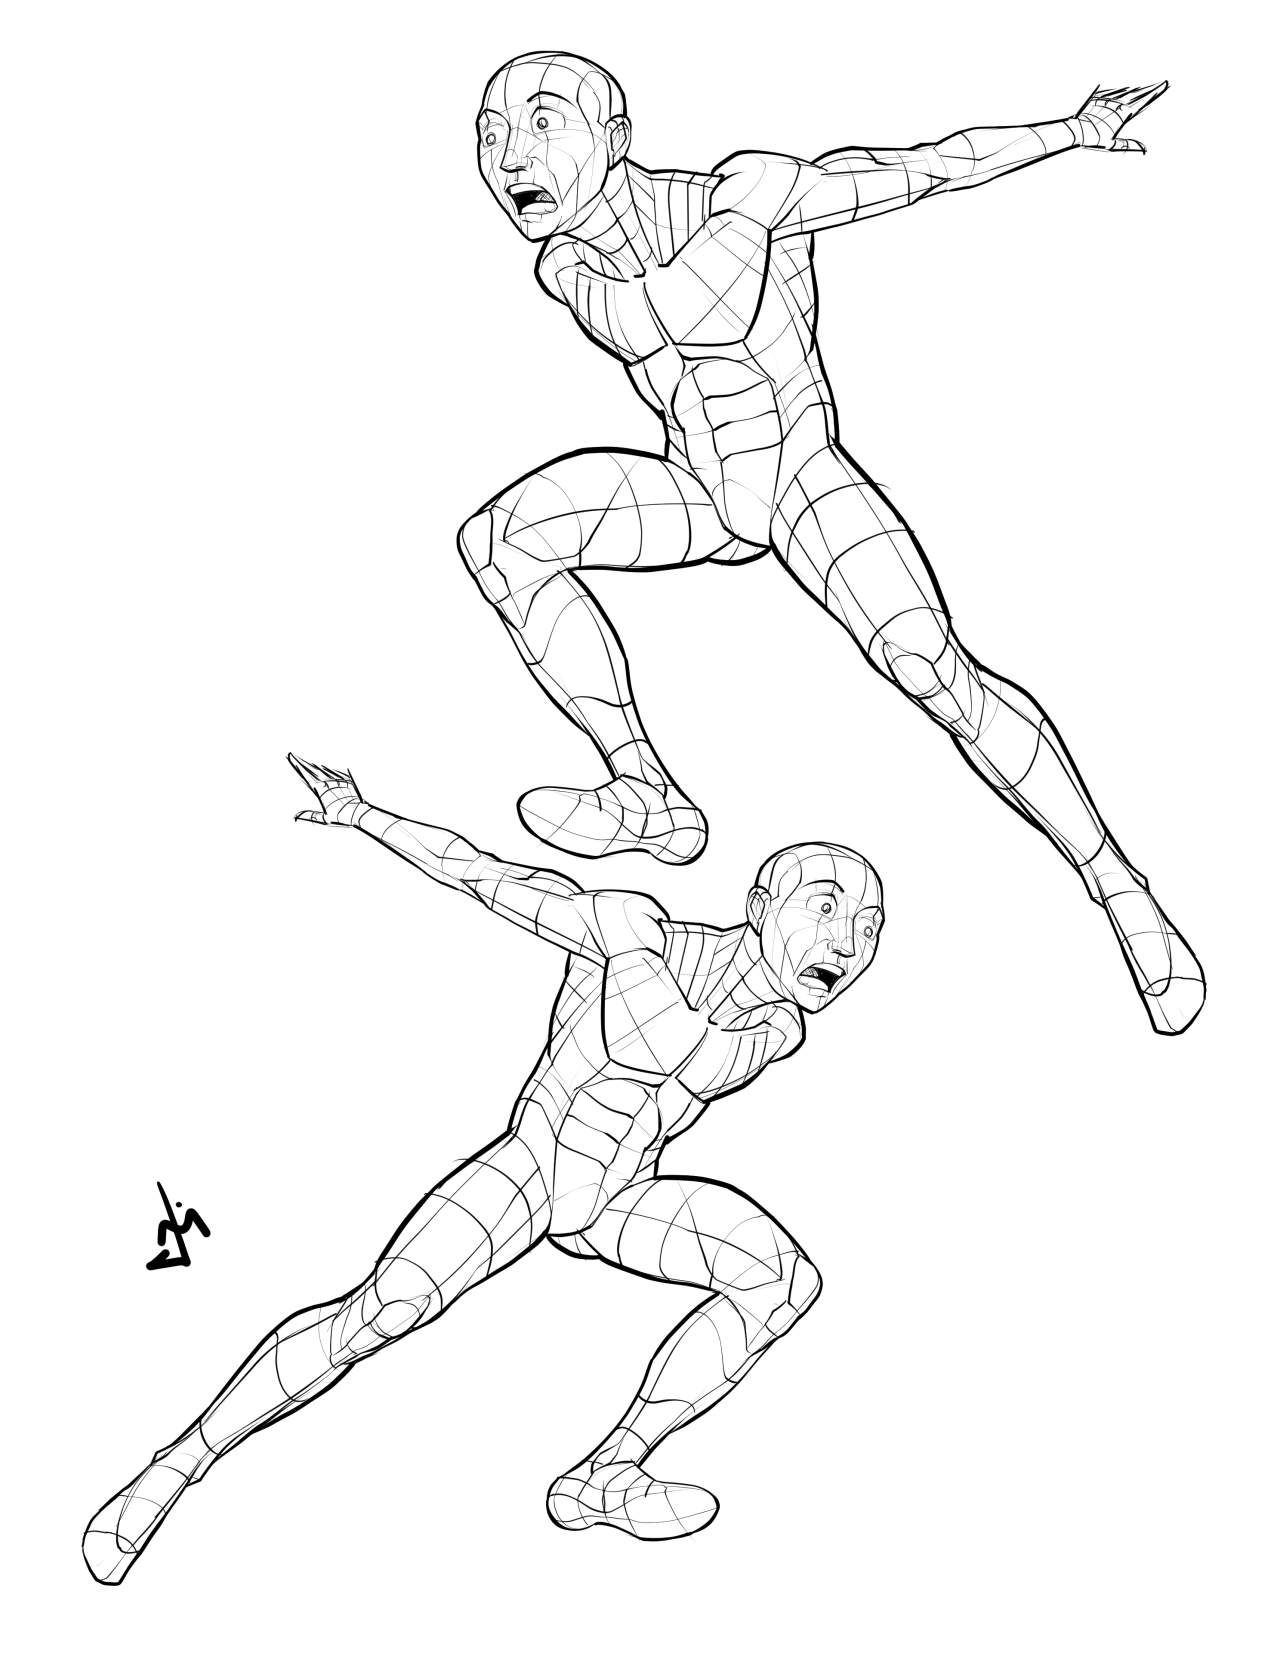 Female Stretching (Pose) - CLIP STUDIO ASSETS